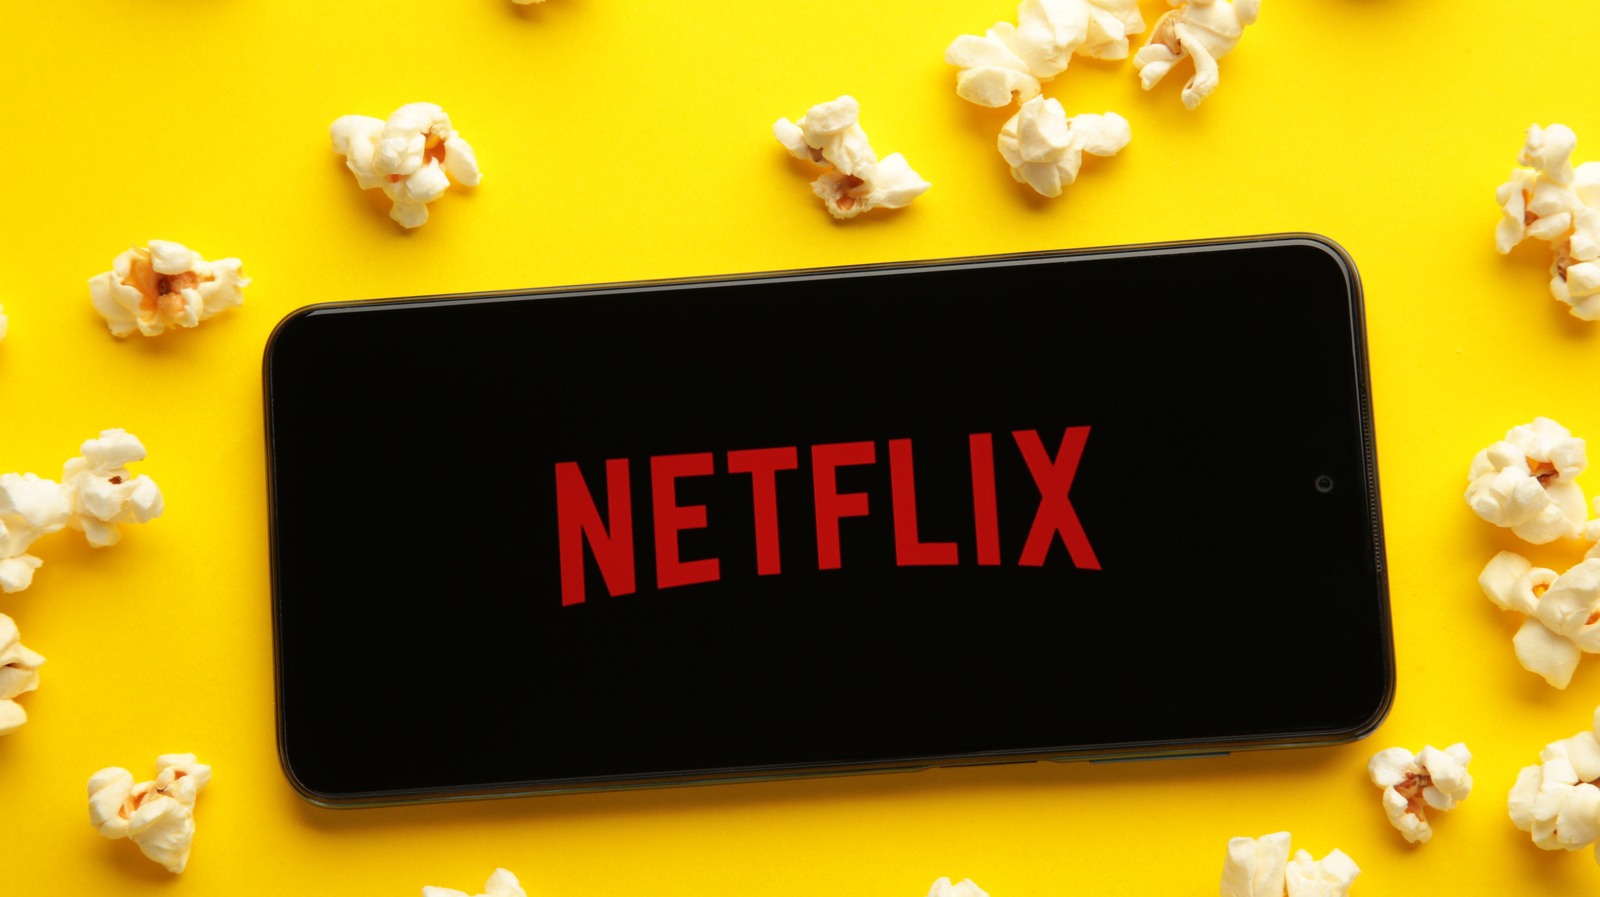 How To Fix A Netflix App That Keeps Crashing On iPhone